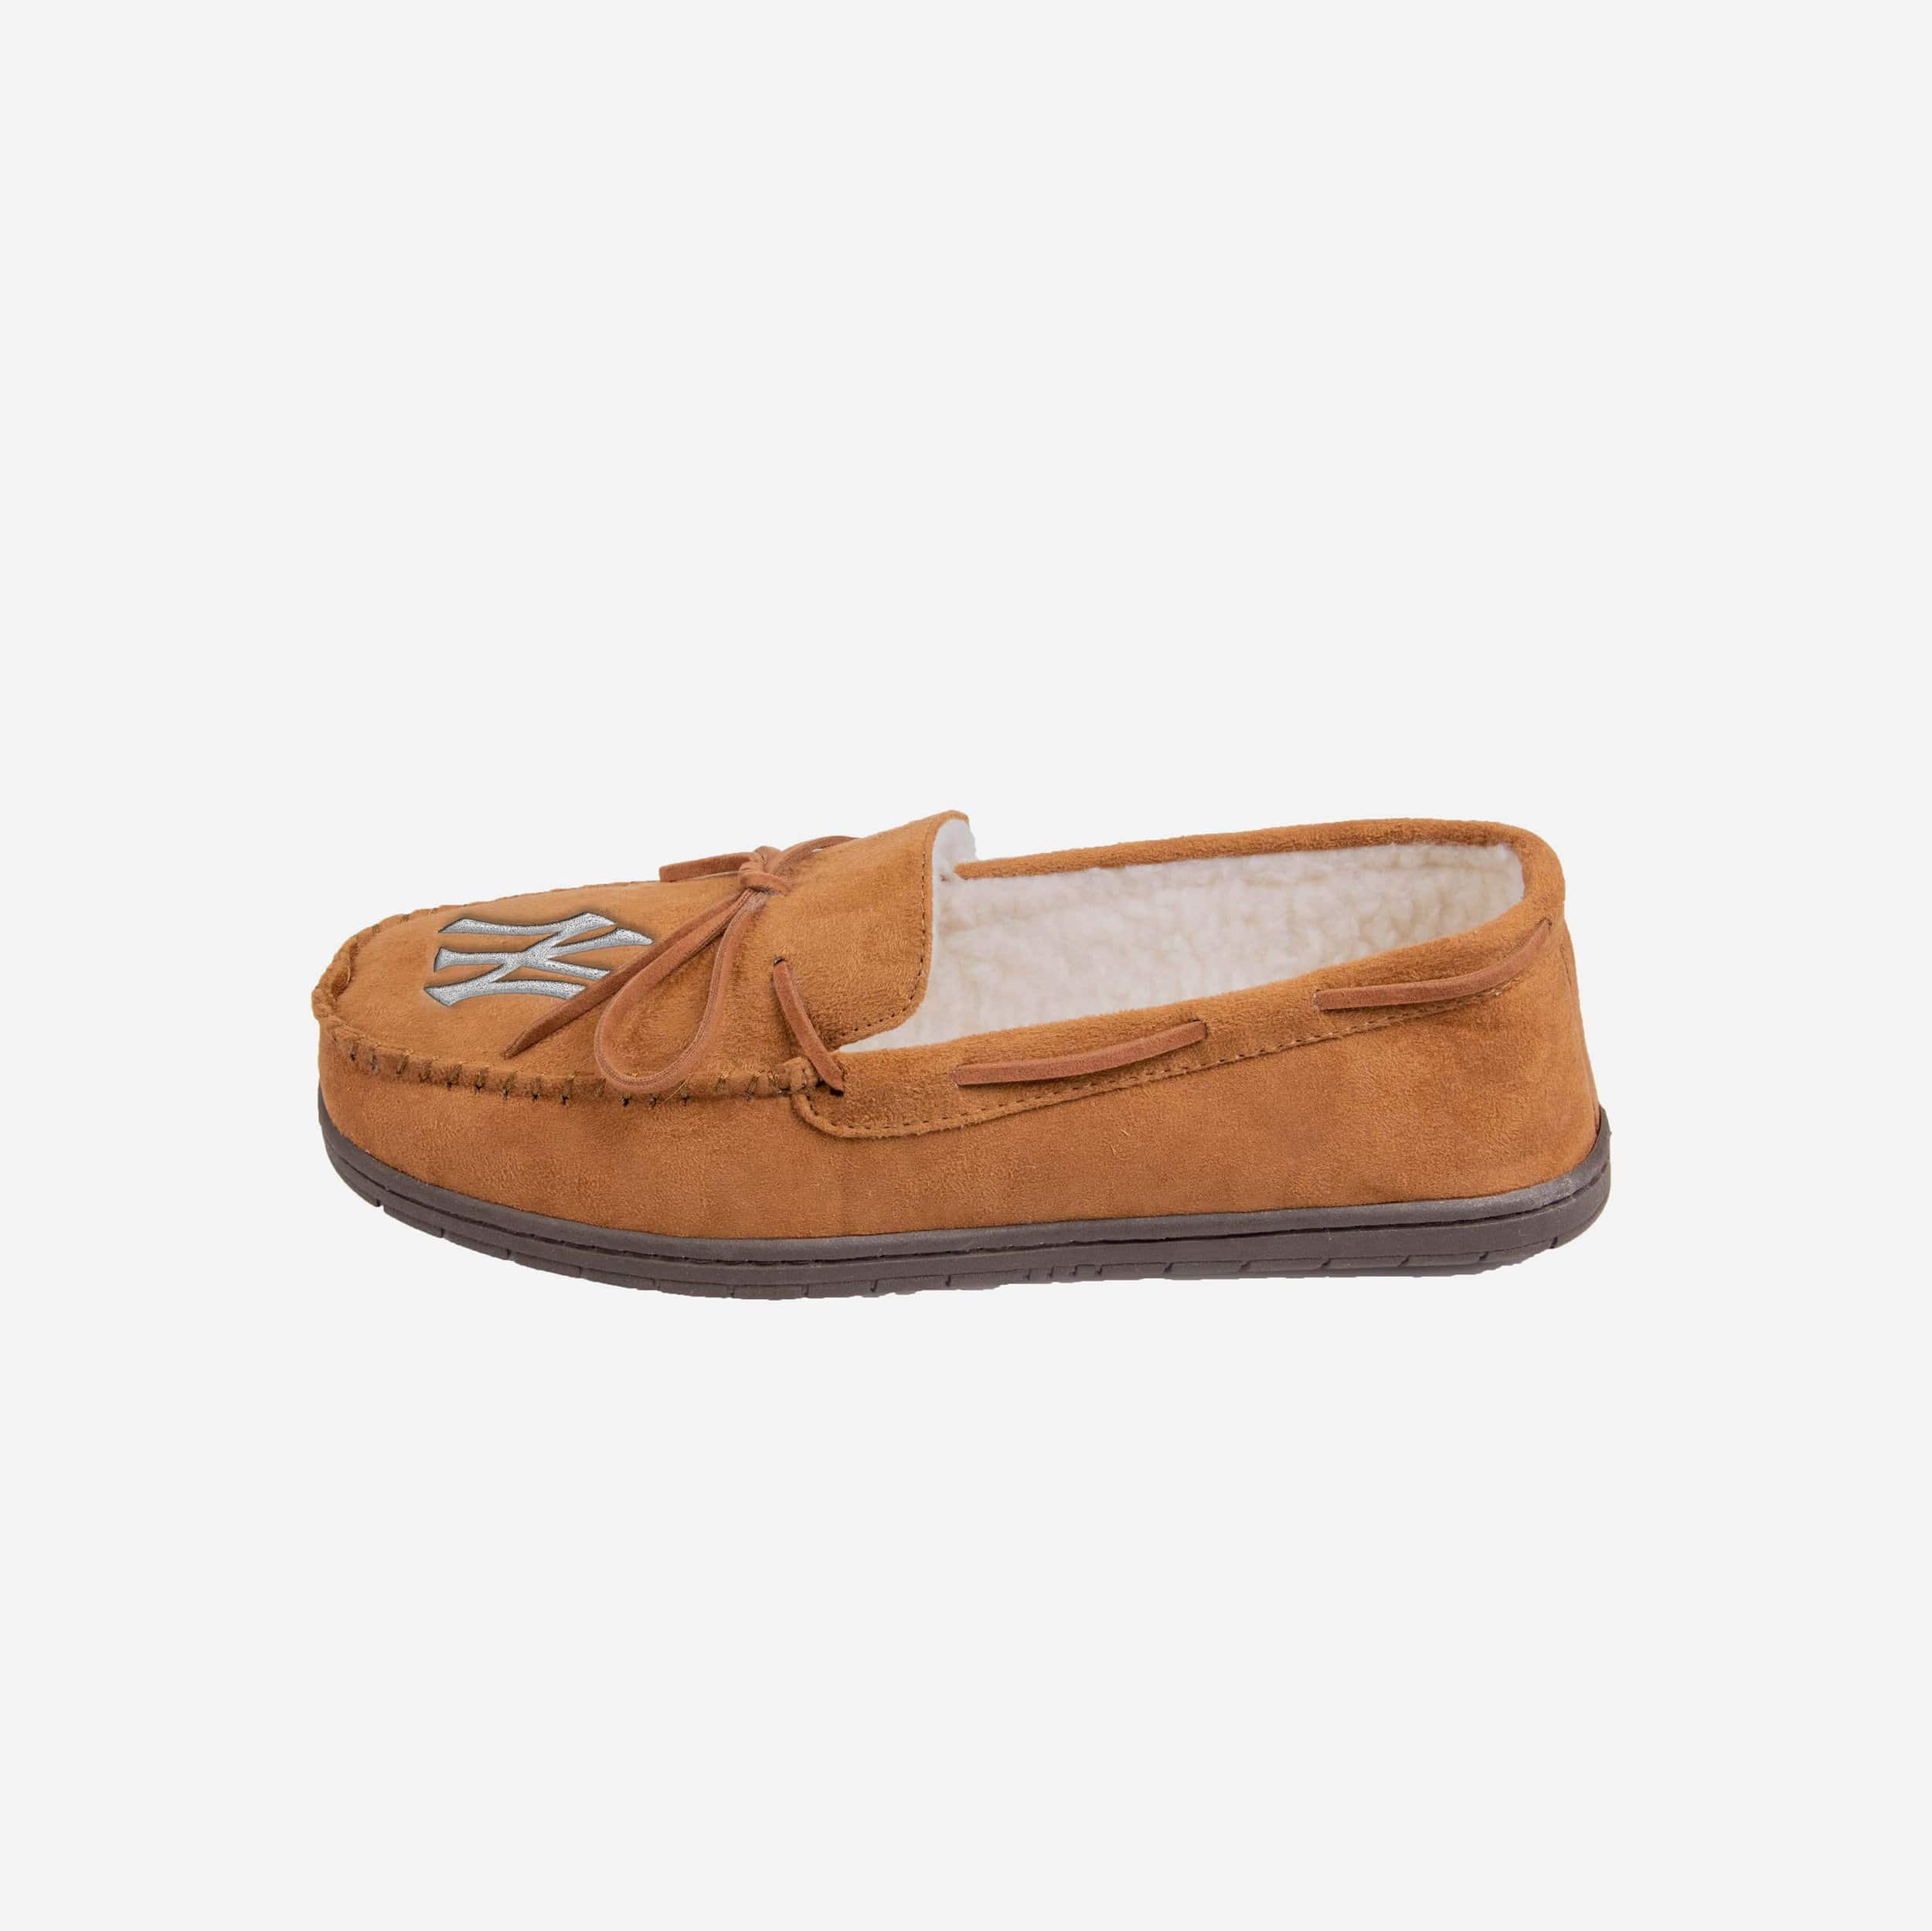 yankee moccasin slippers